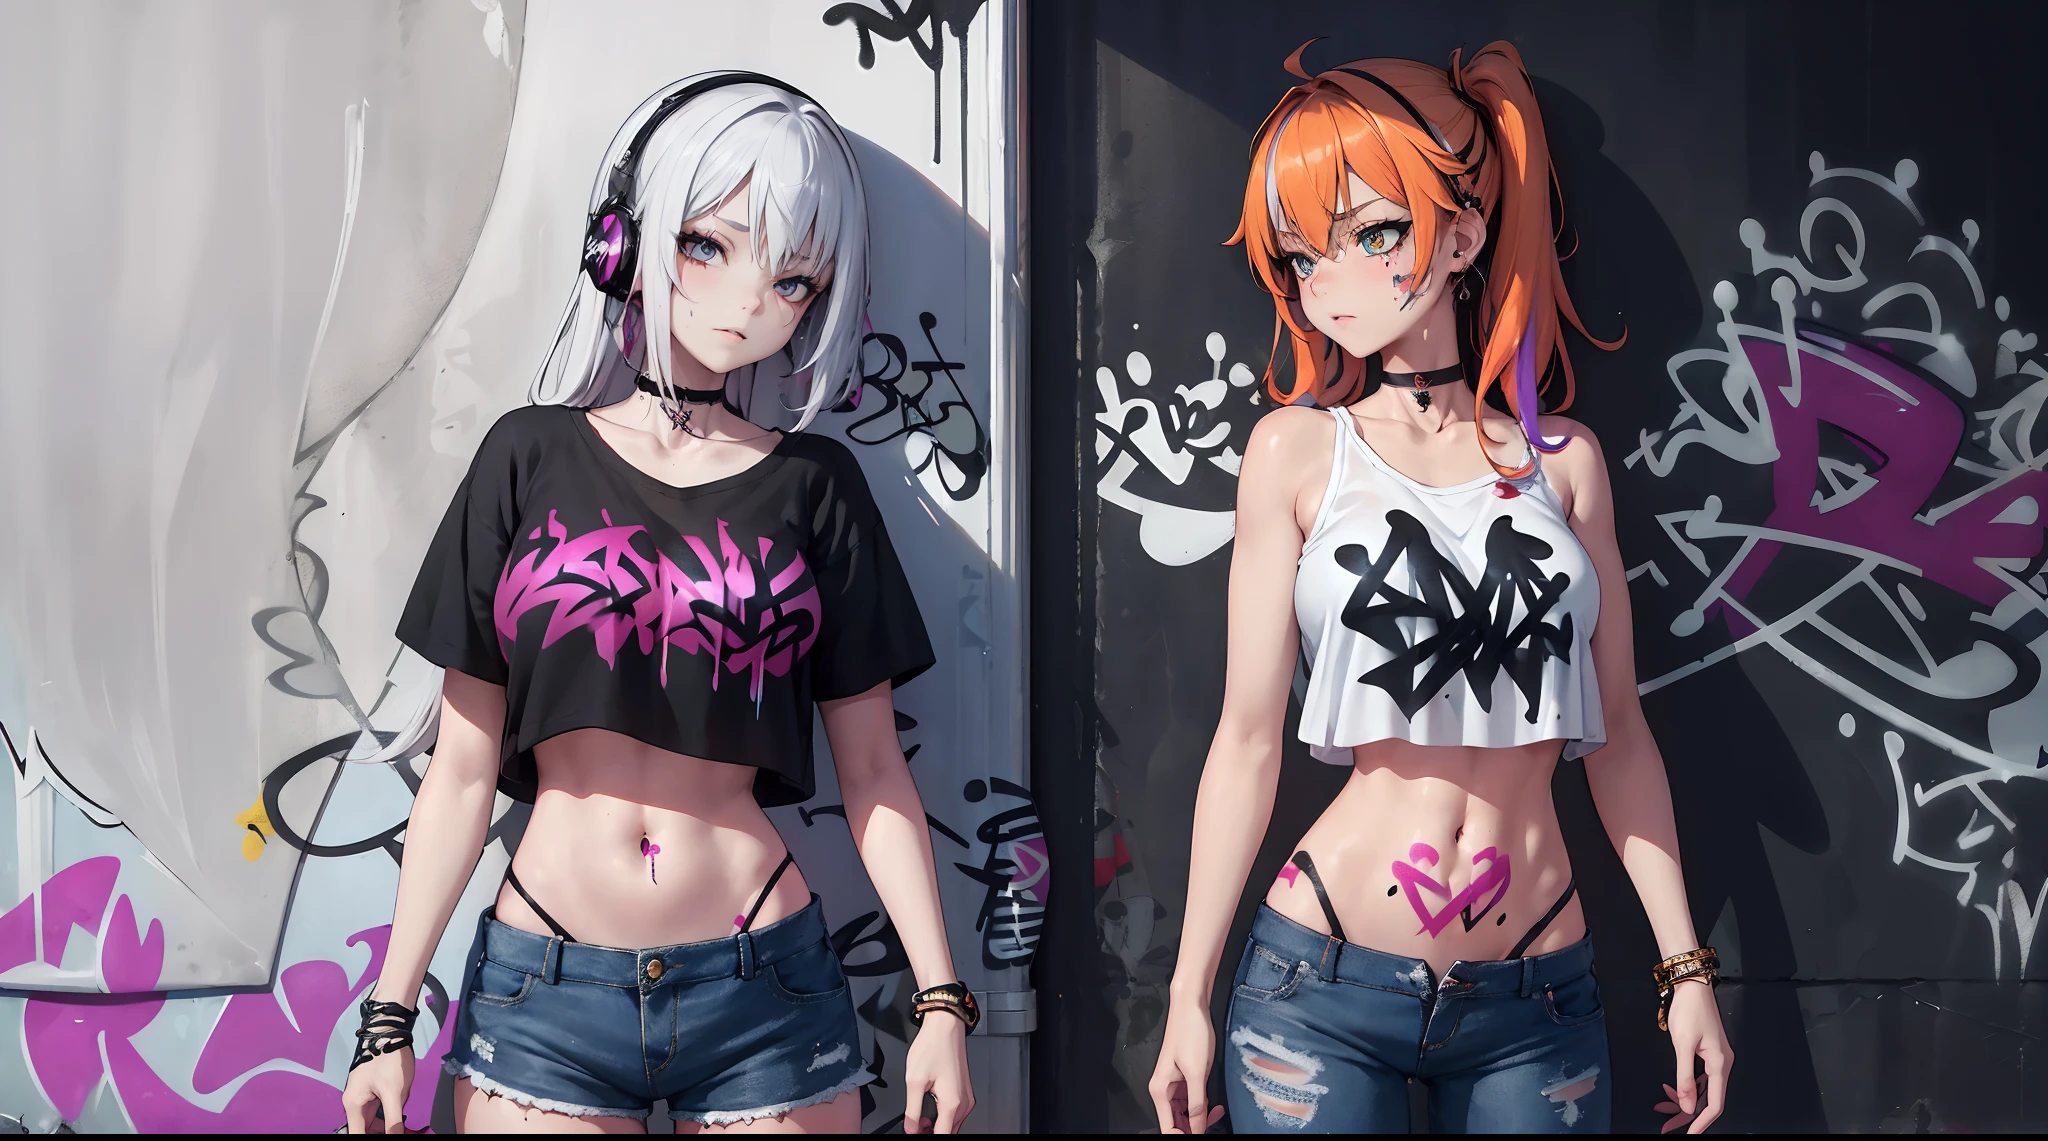 masterpiece, bestquality, 1girls, bara, crop top, shorts jeans, choker, (Graffiti:1.5), color splashes, arm behind back, against wall, looking at the audience, bracelet, Thigh strap, Paint on the body..........., Head tilt, bored, multicolored hair, water eyes, headset,